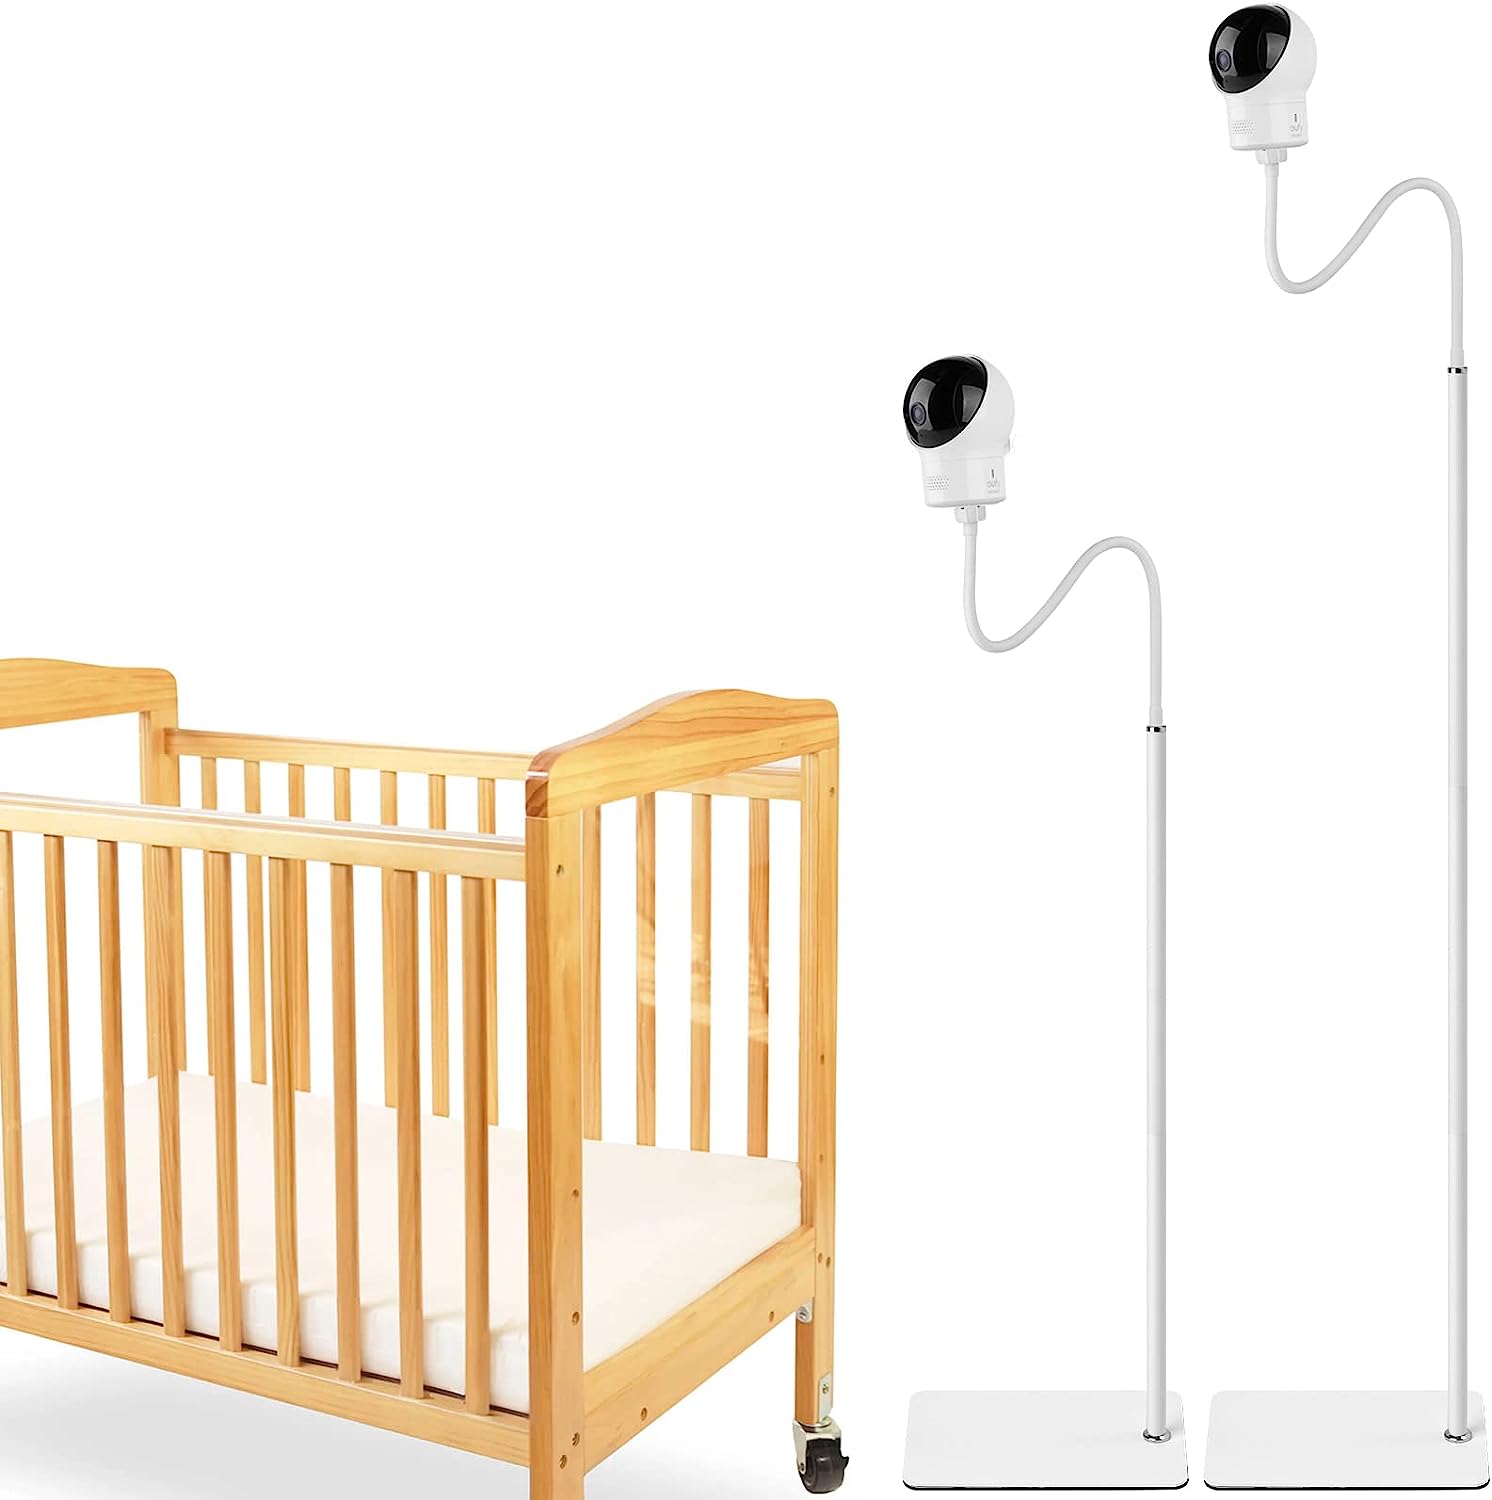 iTODOS Baby Monitor Floor Stand Holder for Eufy [...]